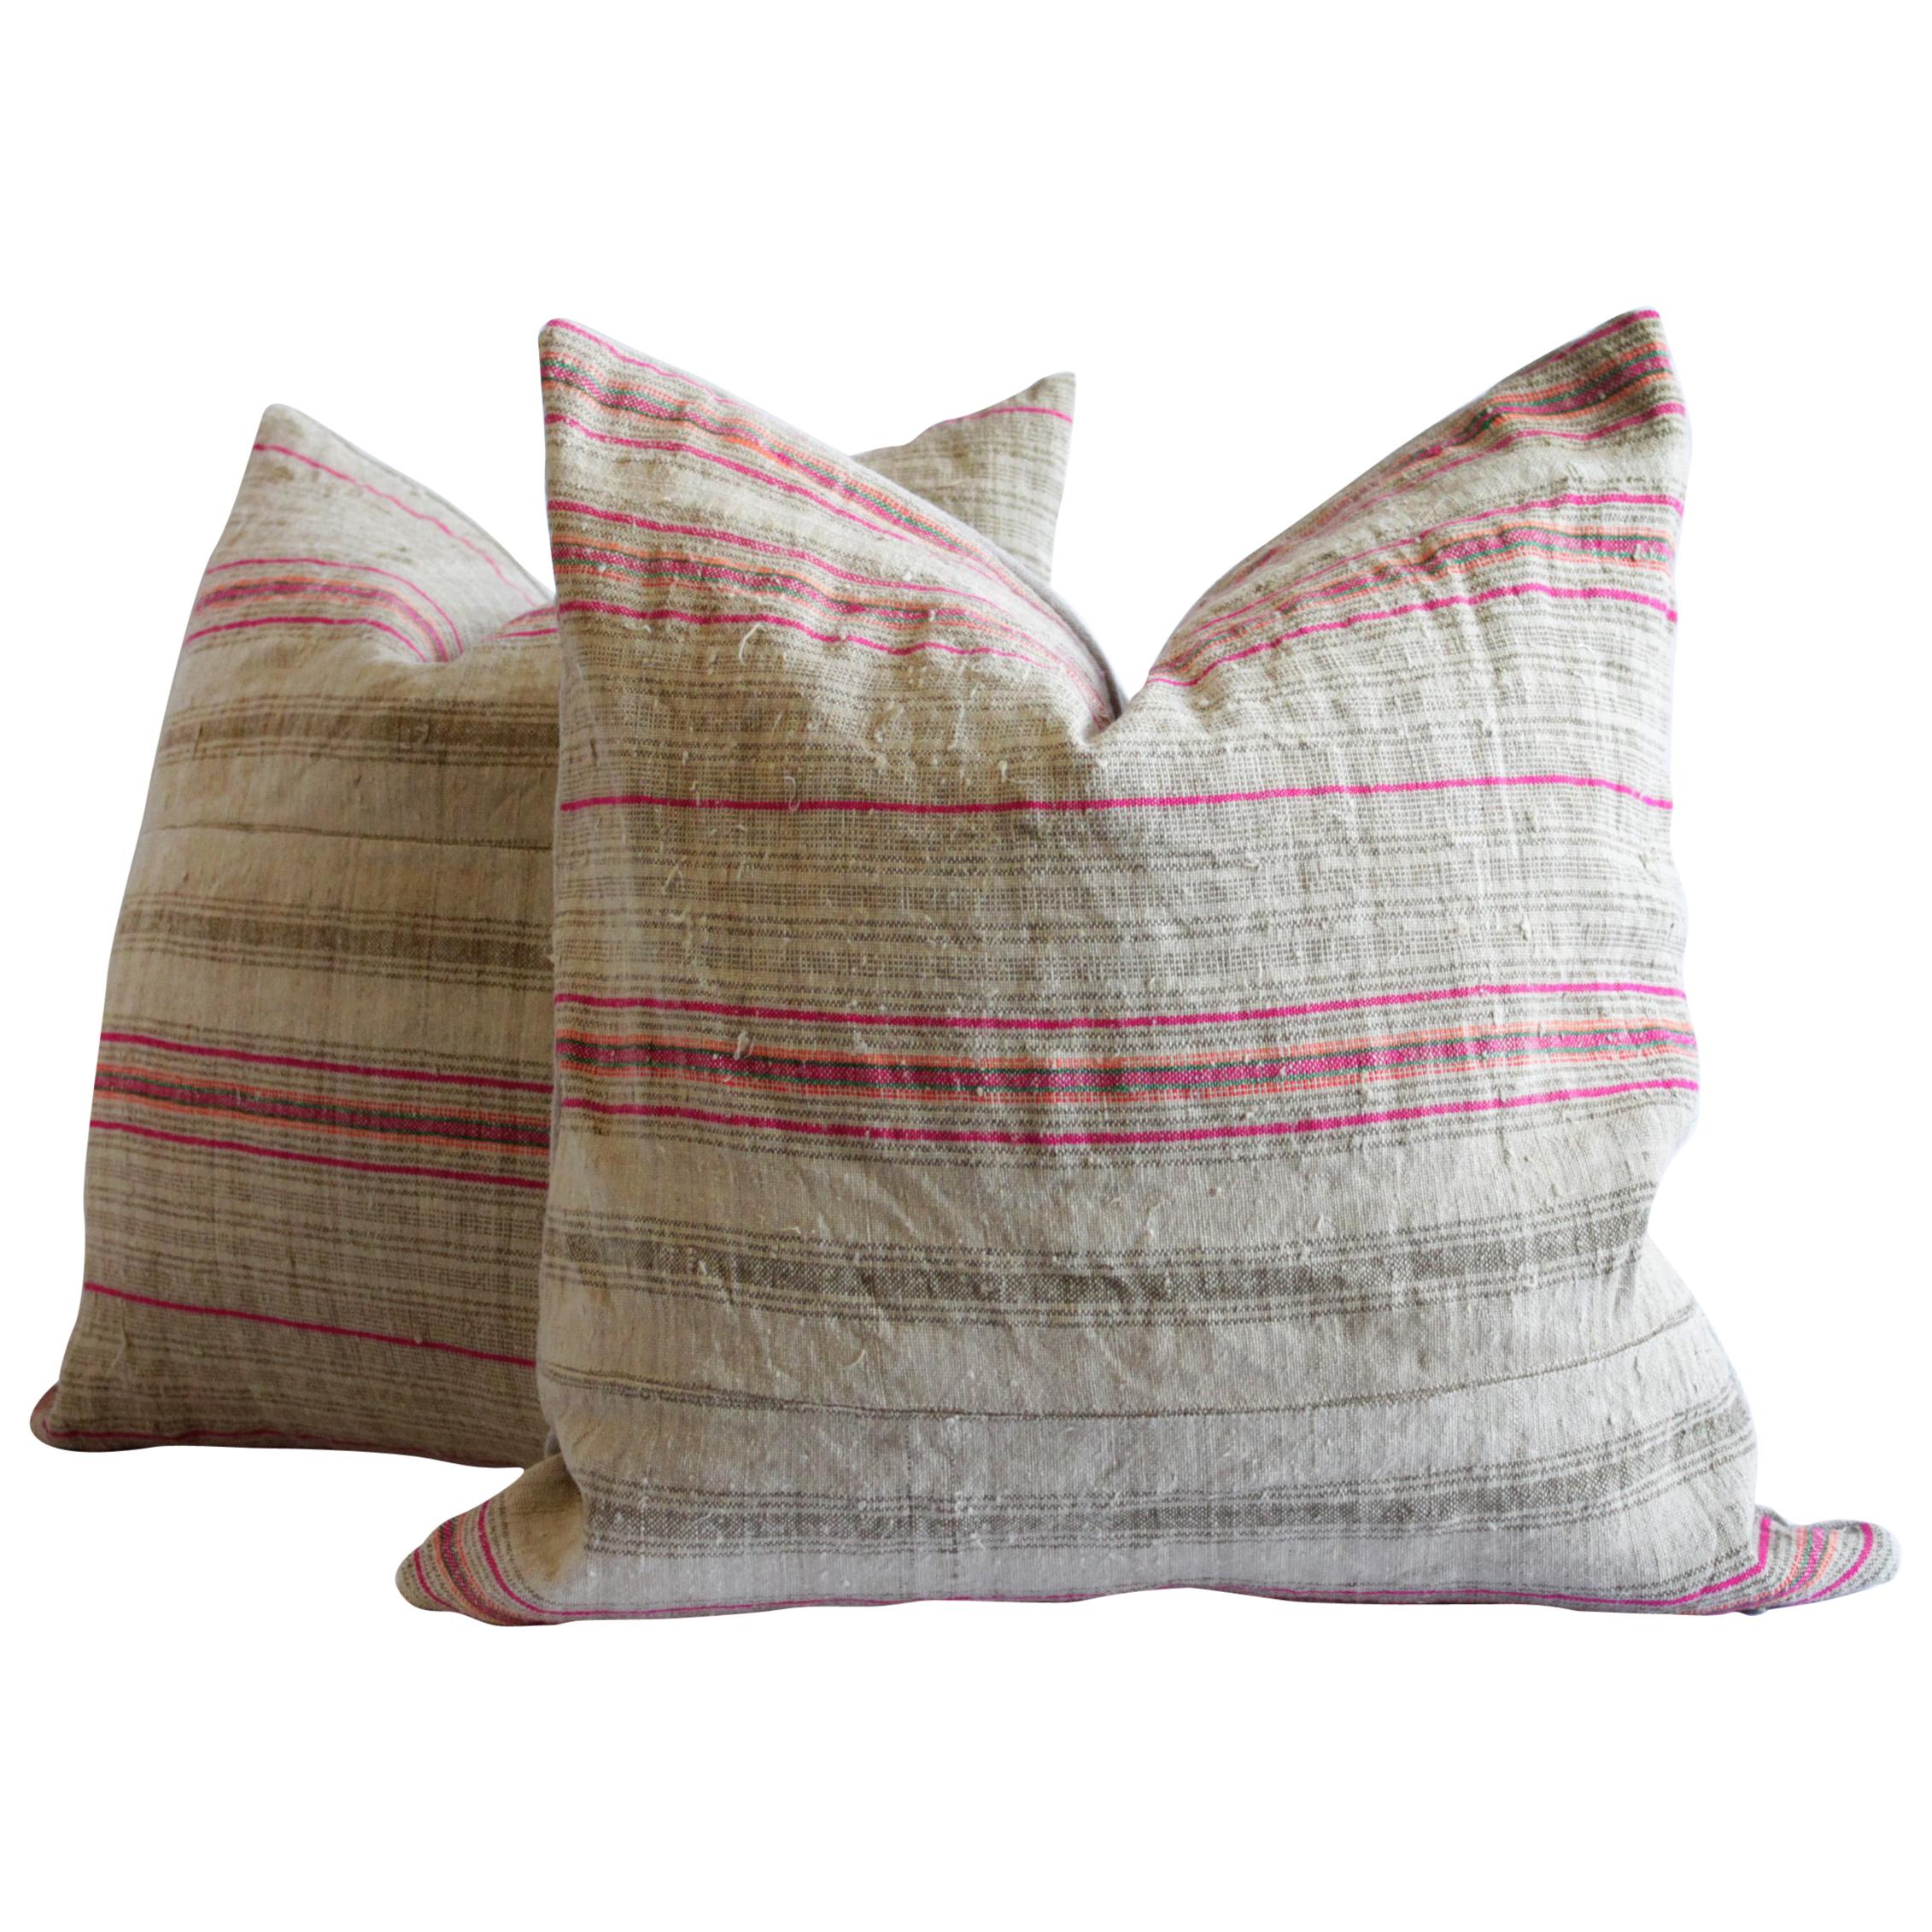 Antique Grainsack Linen Stripe Pillows in Natural Tones with Pink Stripes